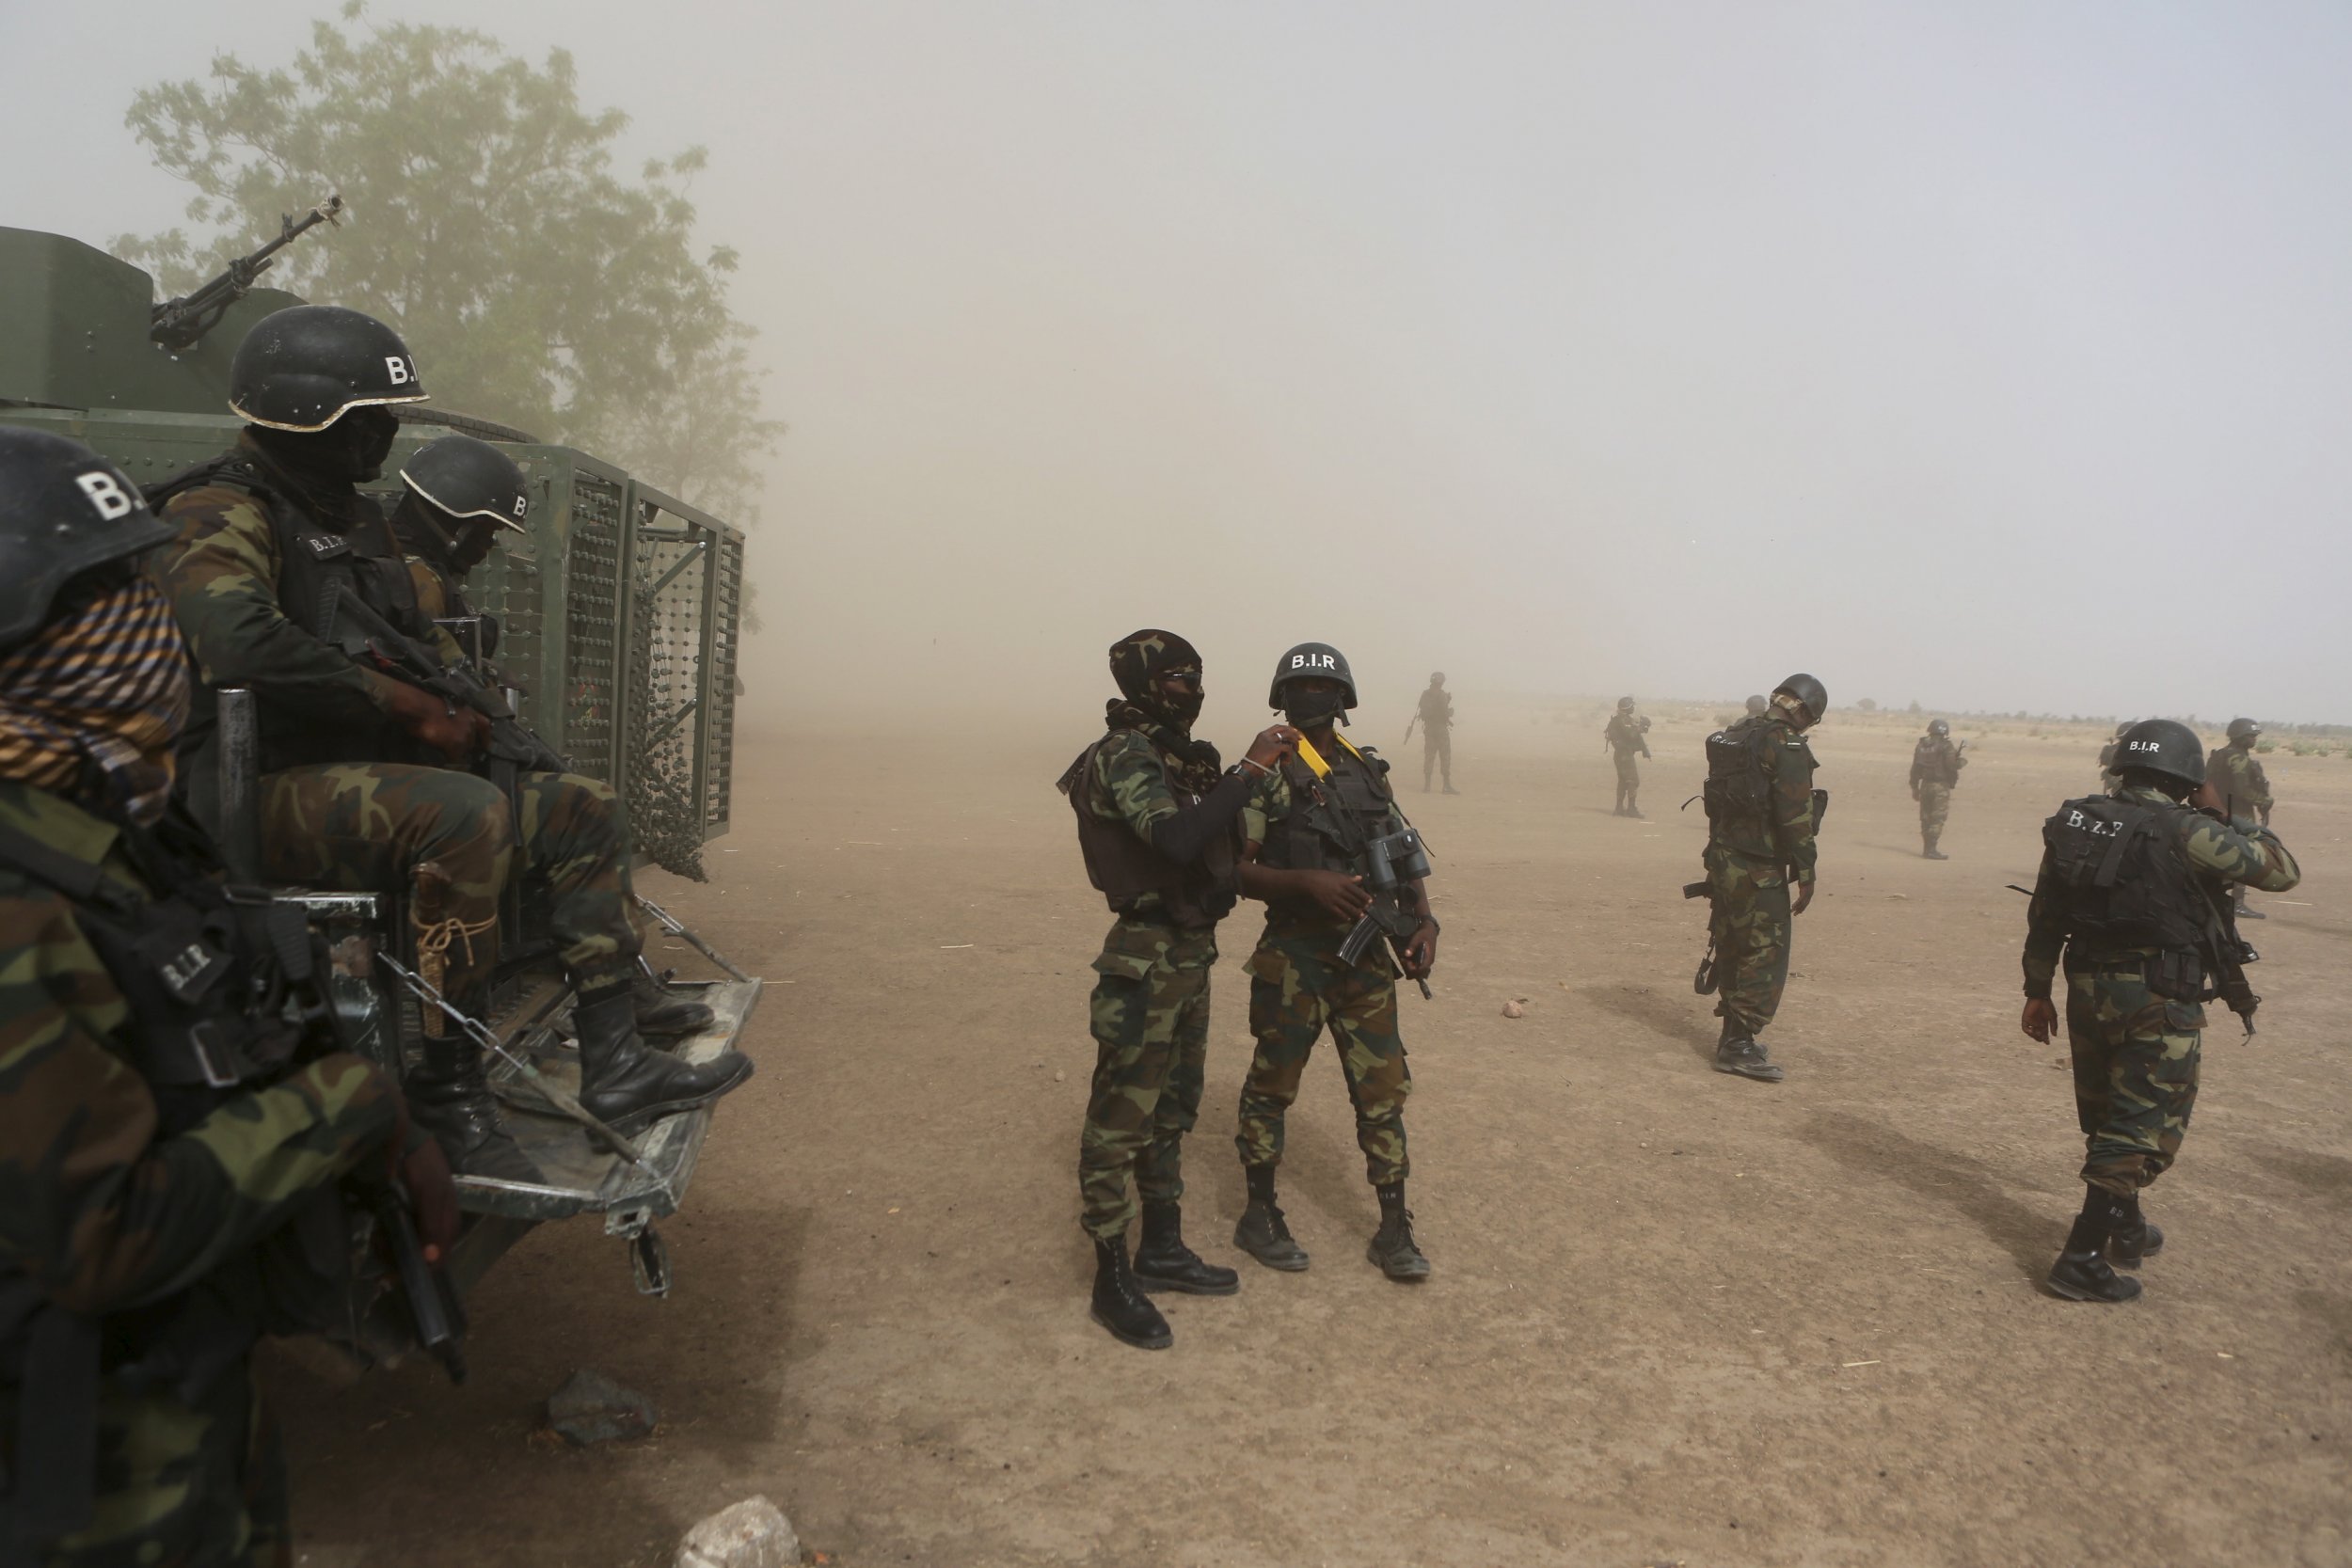 Cameroon soldiers